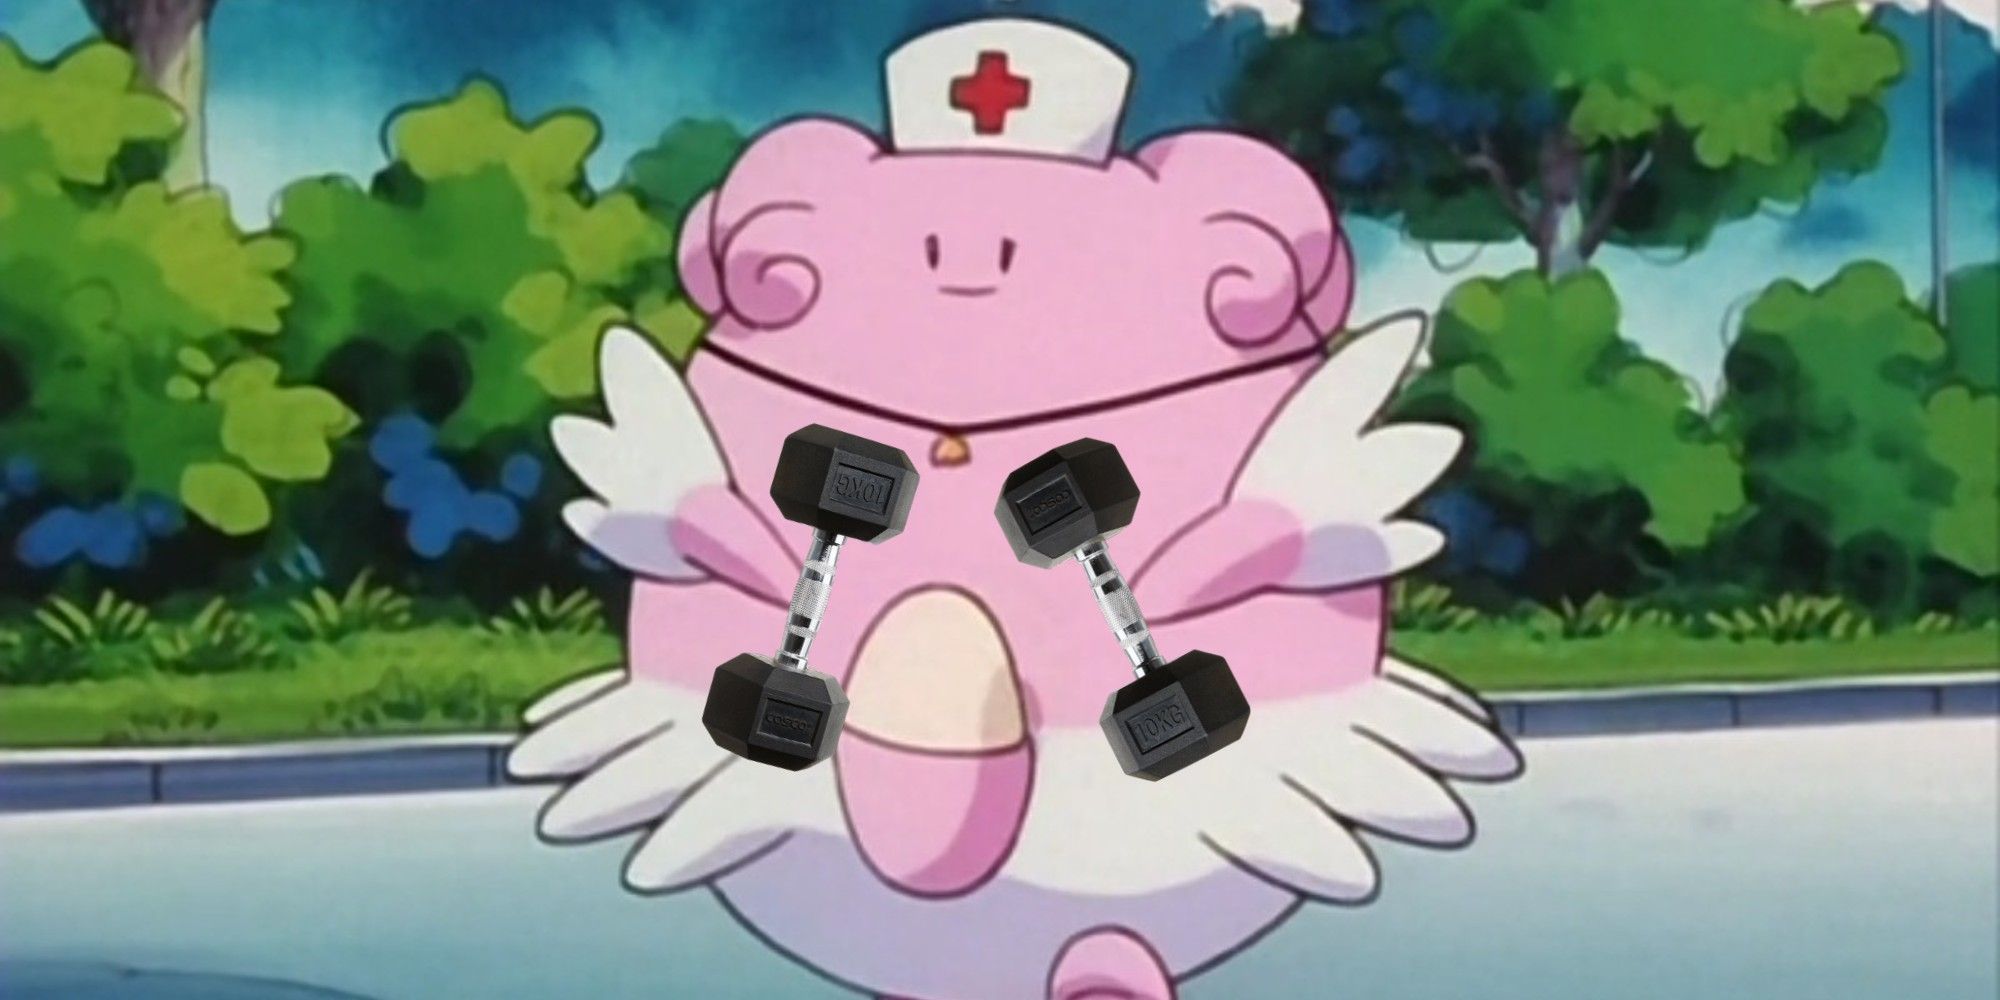 blissey lifting weights